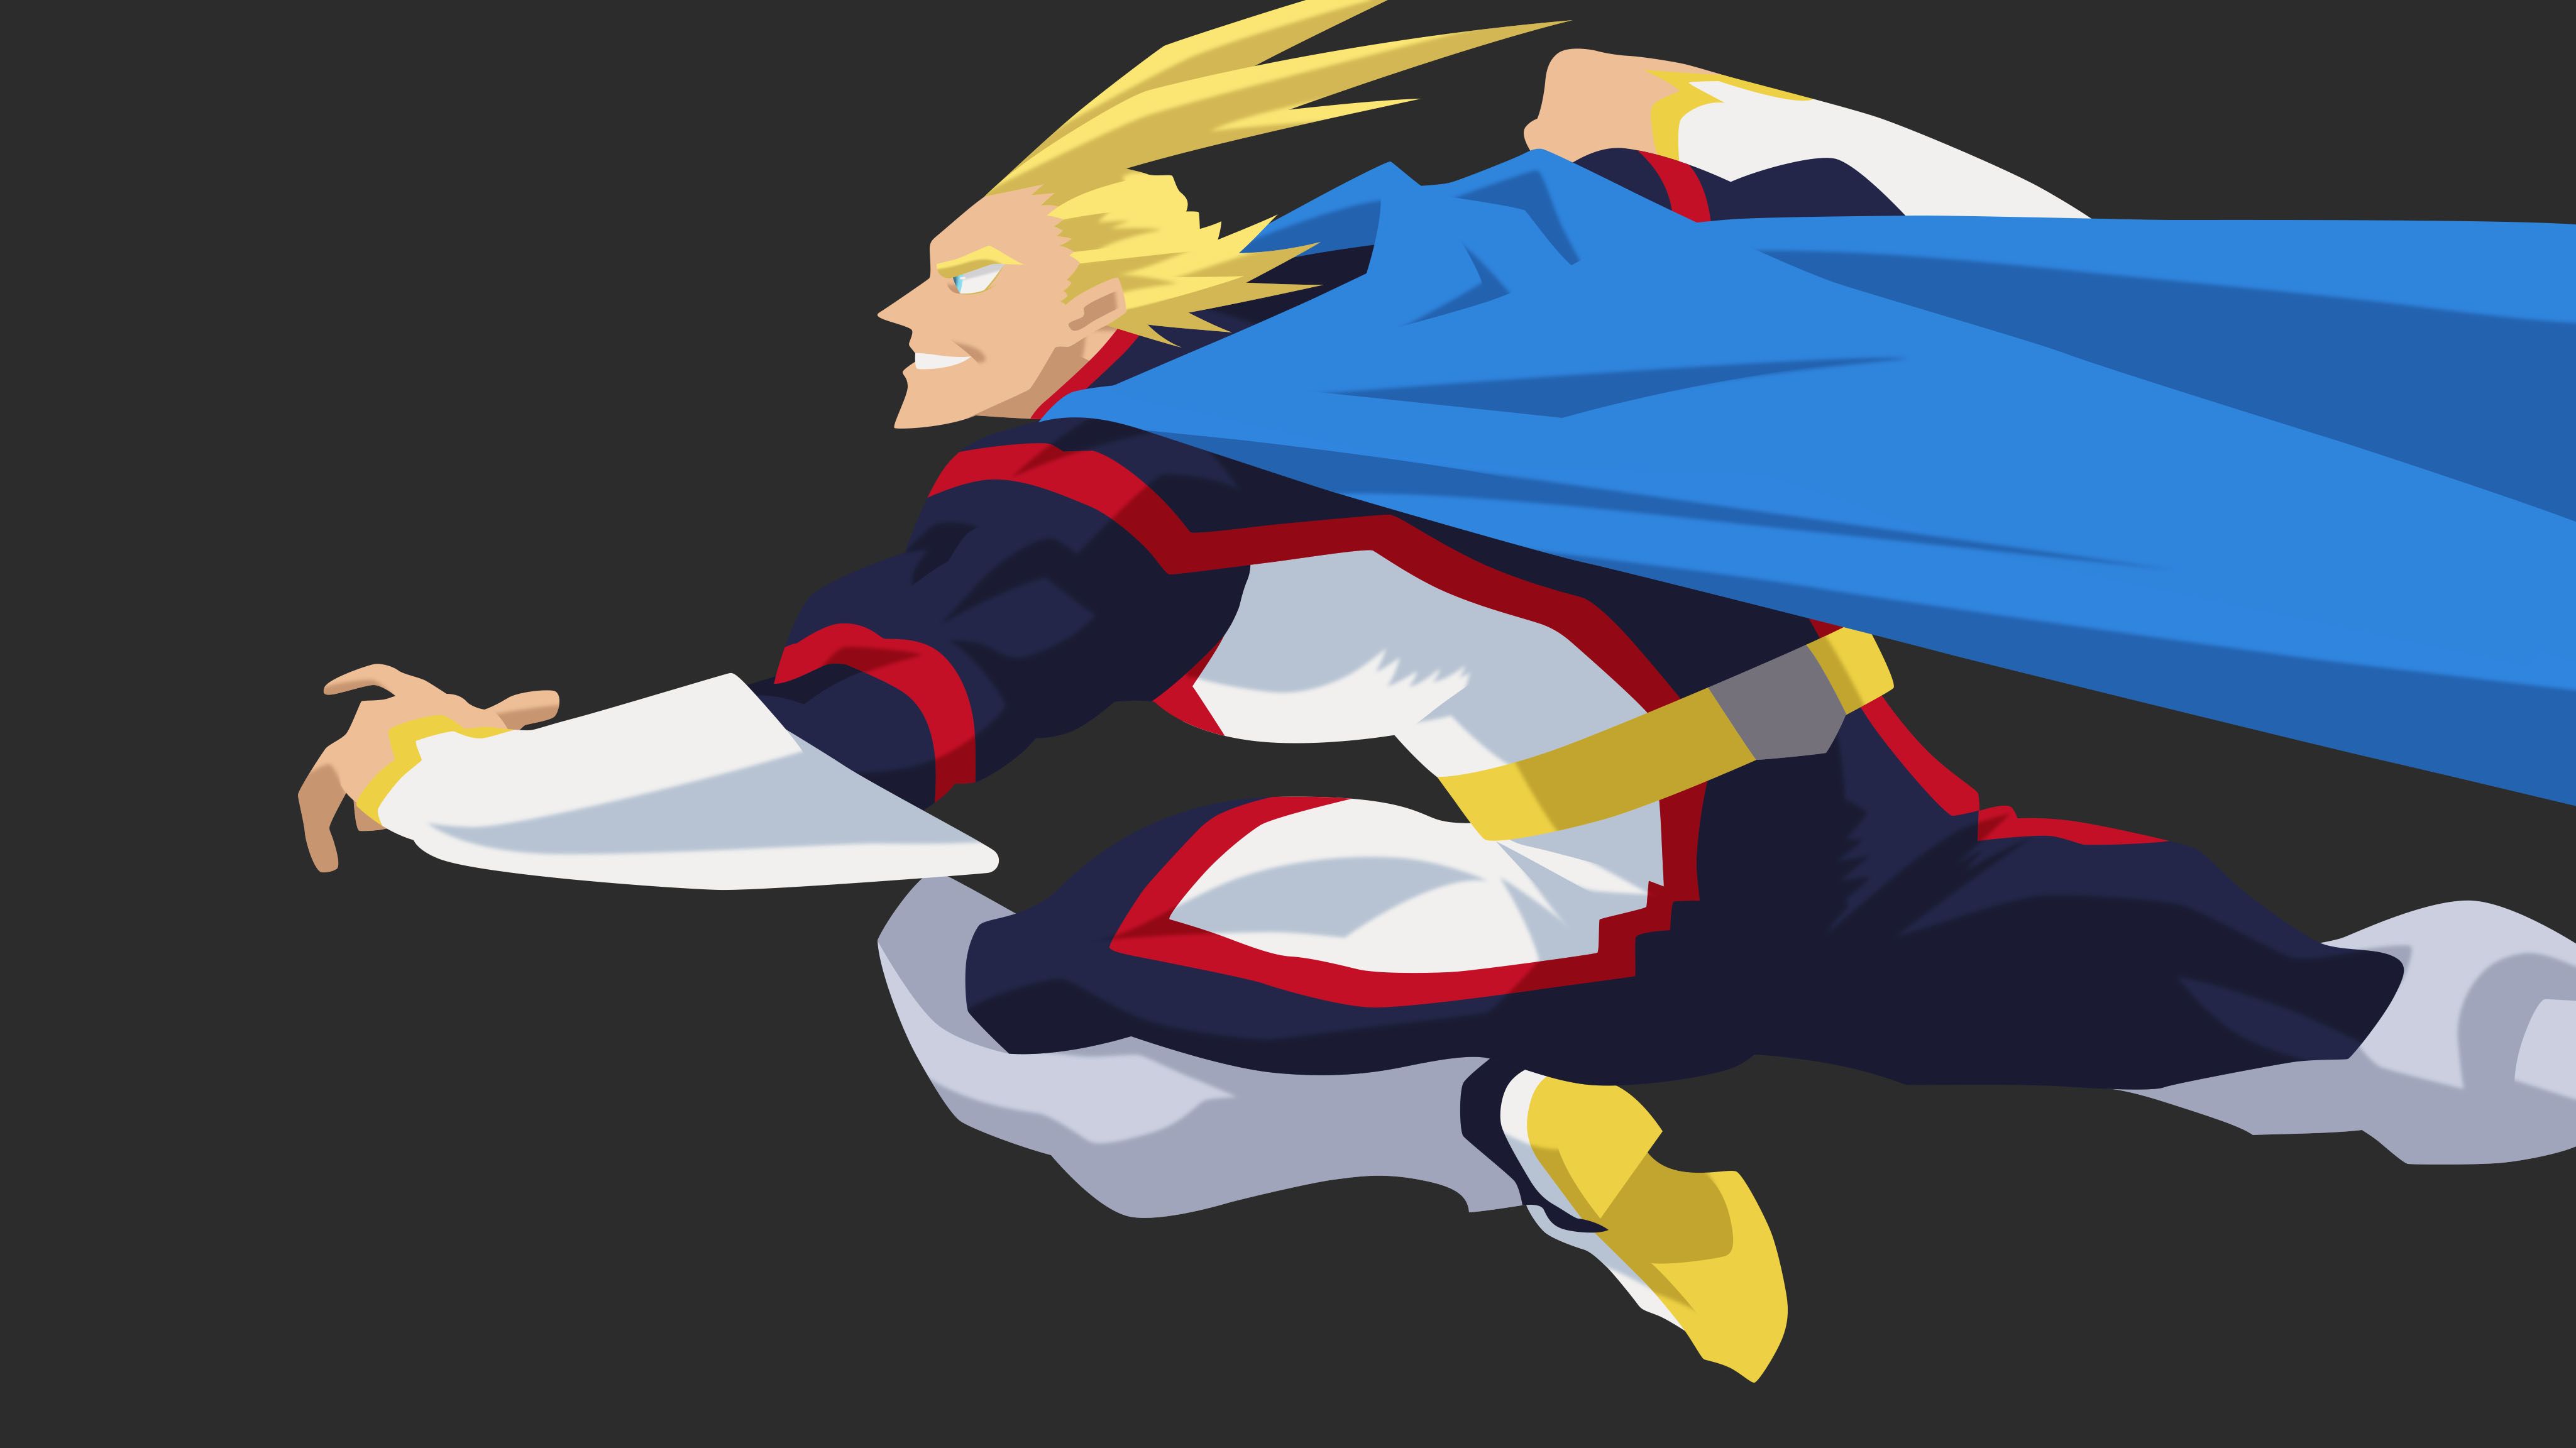 All Might 4K My Hero Academia Wallpaper, HD Anime 4K Wallpaper, Image, Photo and Background